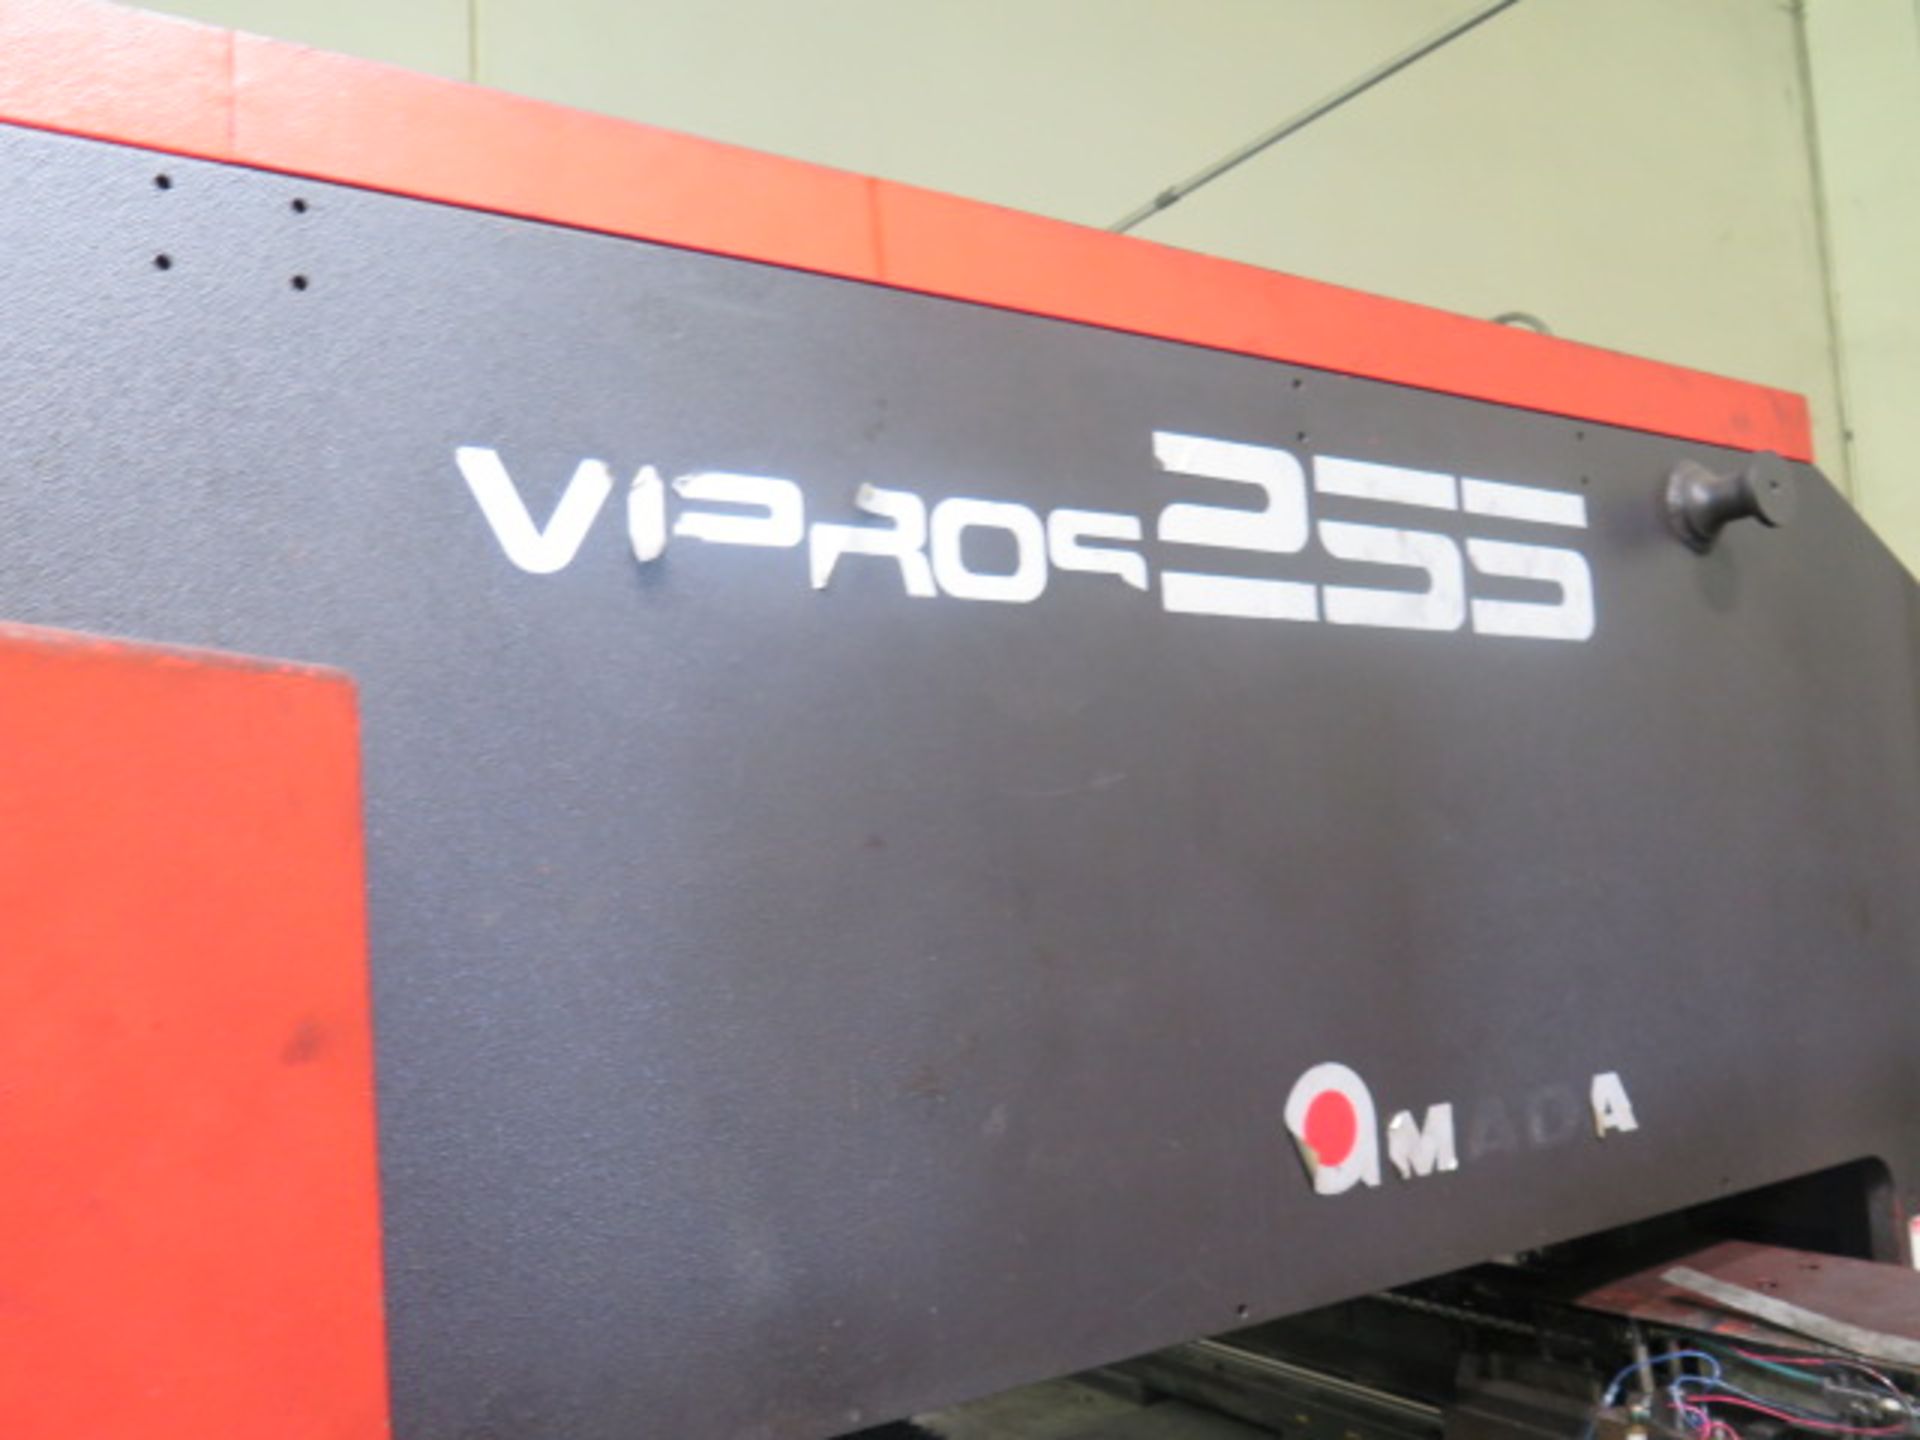 Amada VIPROS 255 30 Ton CNC Turret Punch Press w/ Fanuc 18-P Controls, 58-Station Turret, SOLD AS IS - Image 7 of 23